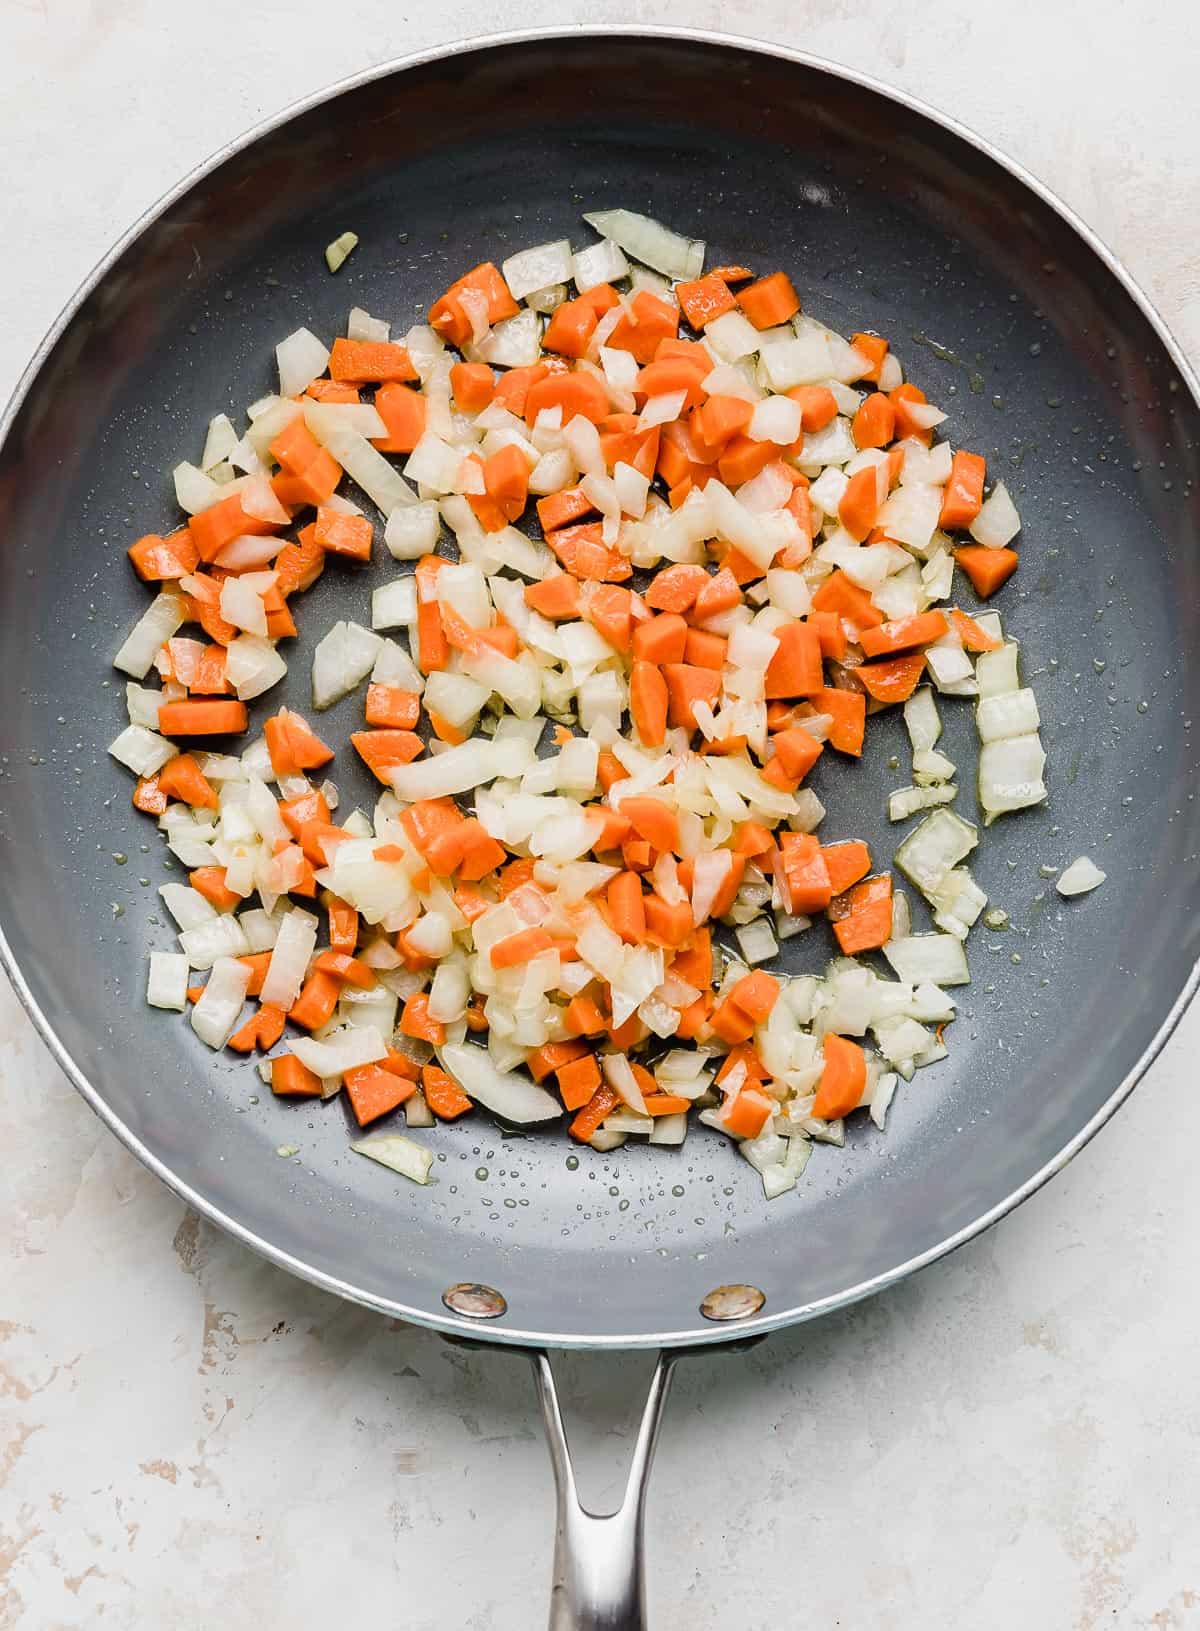 A gray skillet with cooked diced carrots and onion in it.